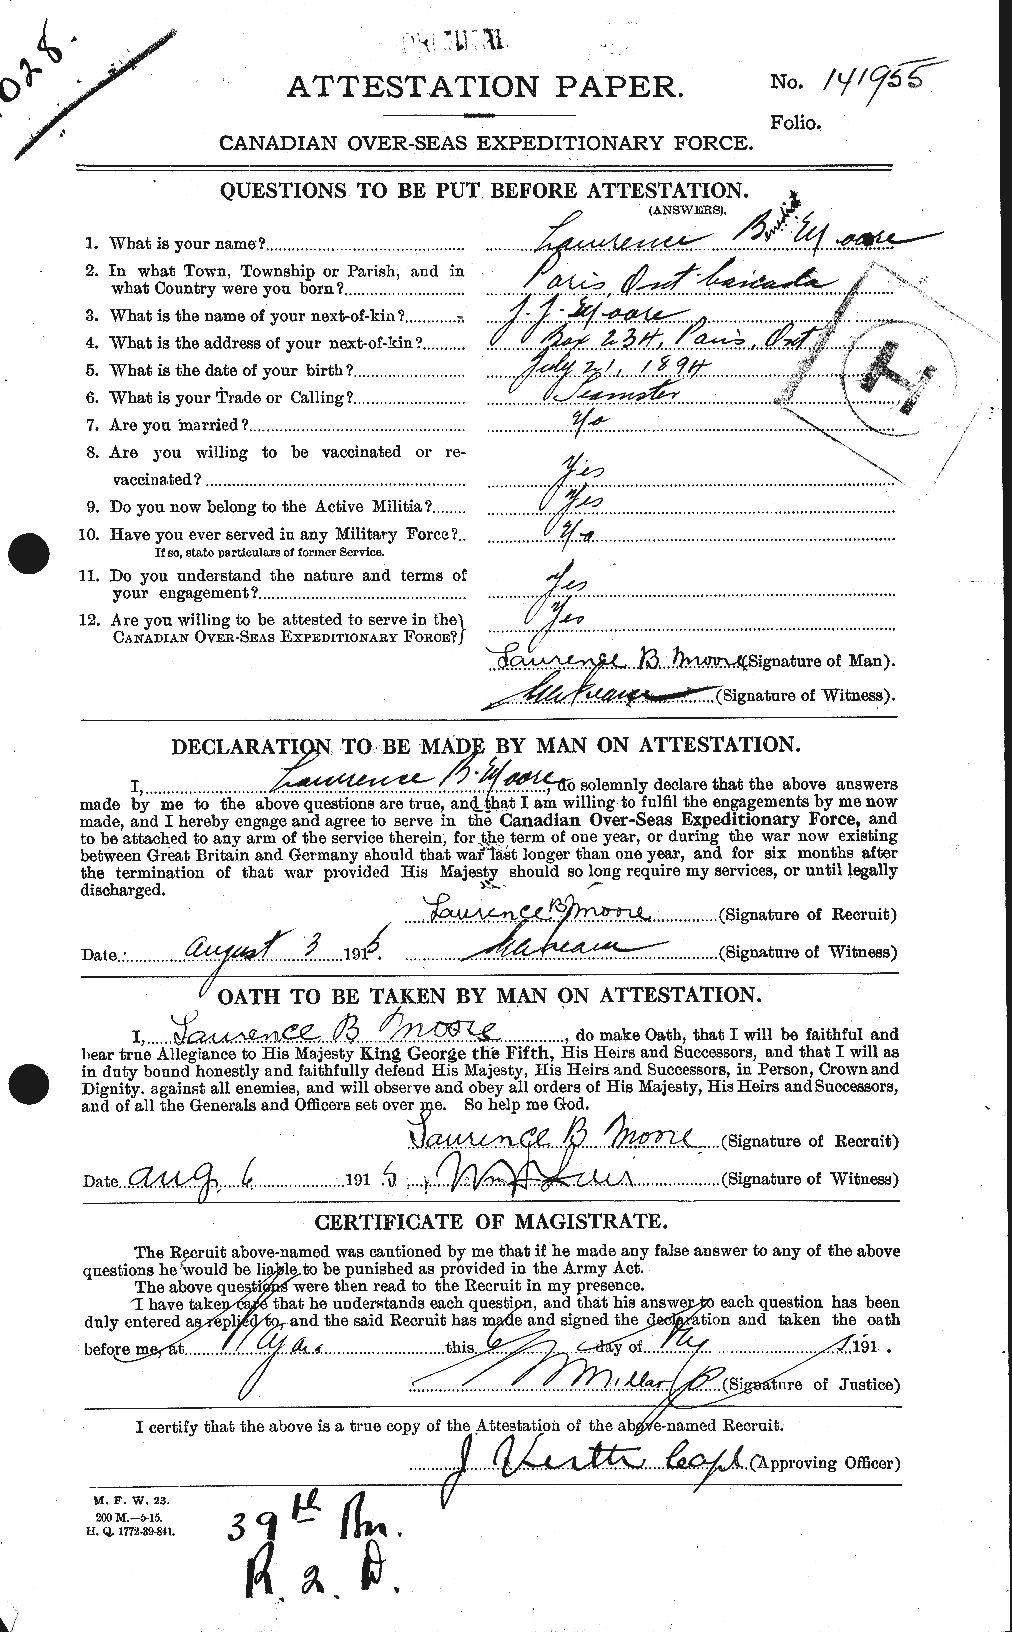 Personnel Records of the First World War - CEF 503395a